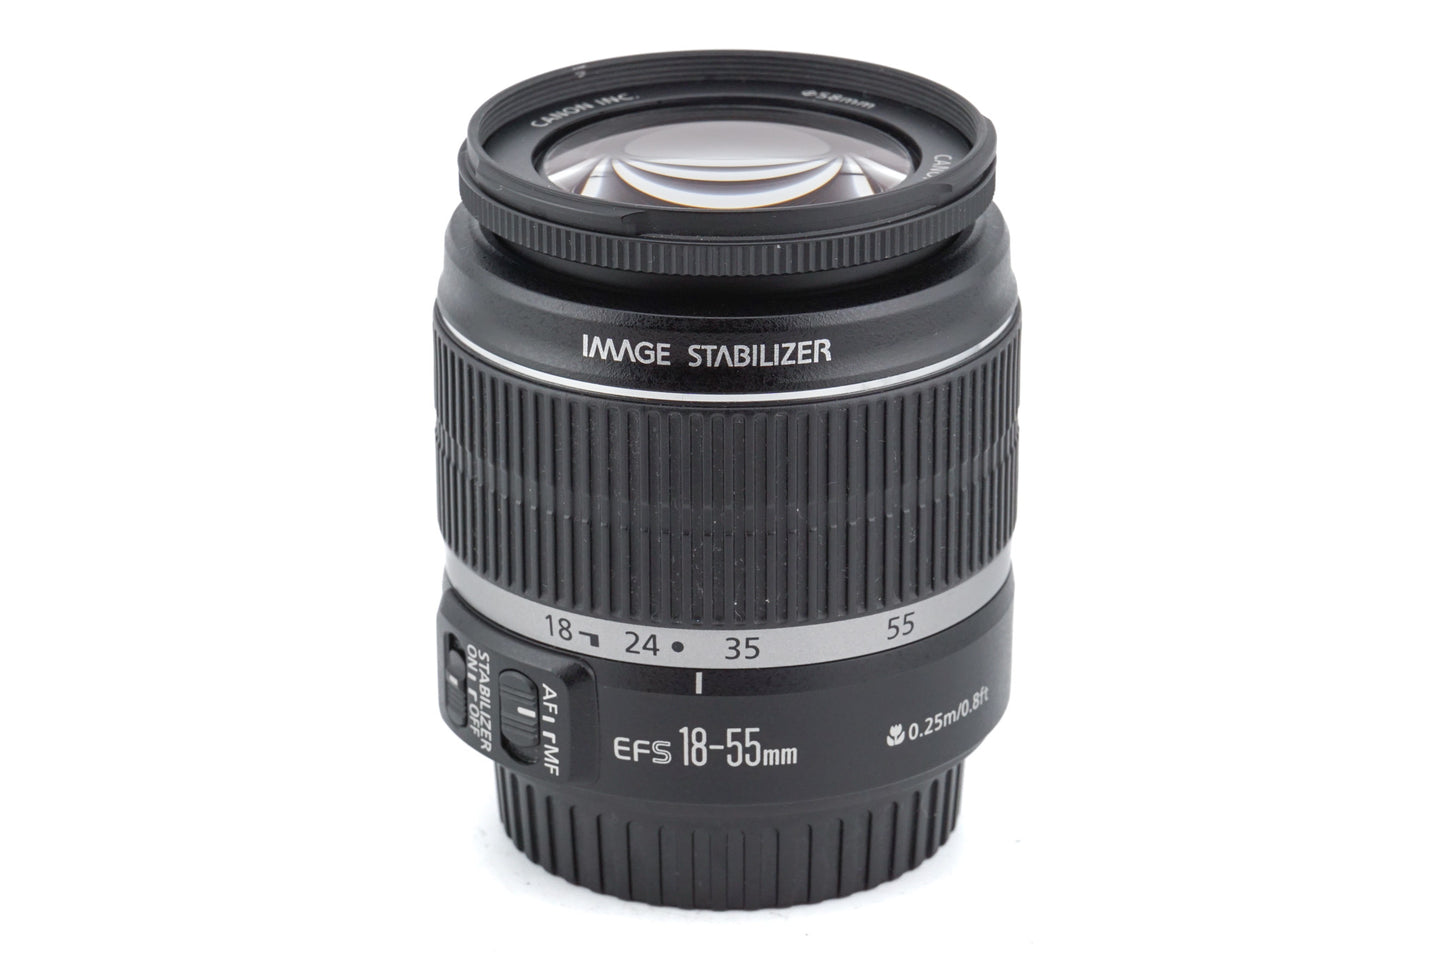 Canon 18-55mm f3.5-5.6 IS - Lens